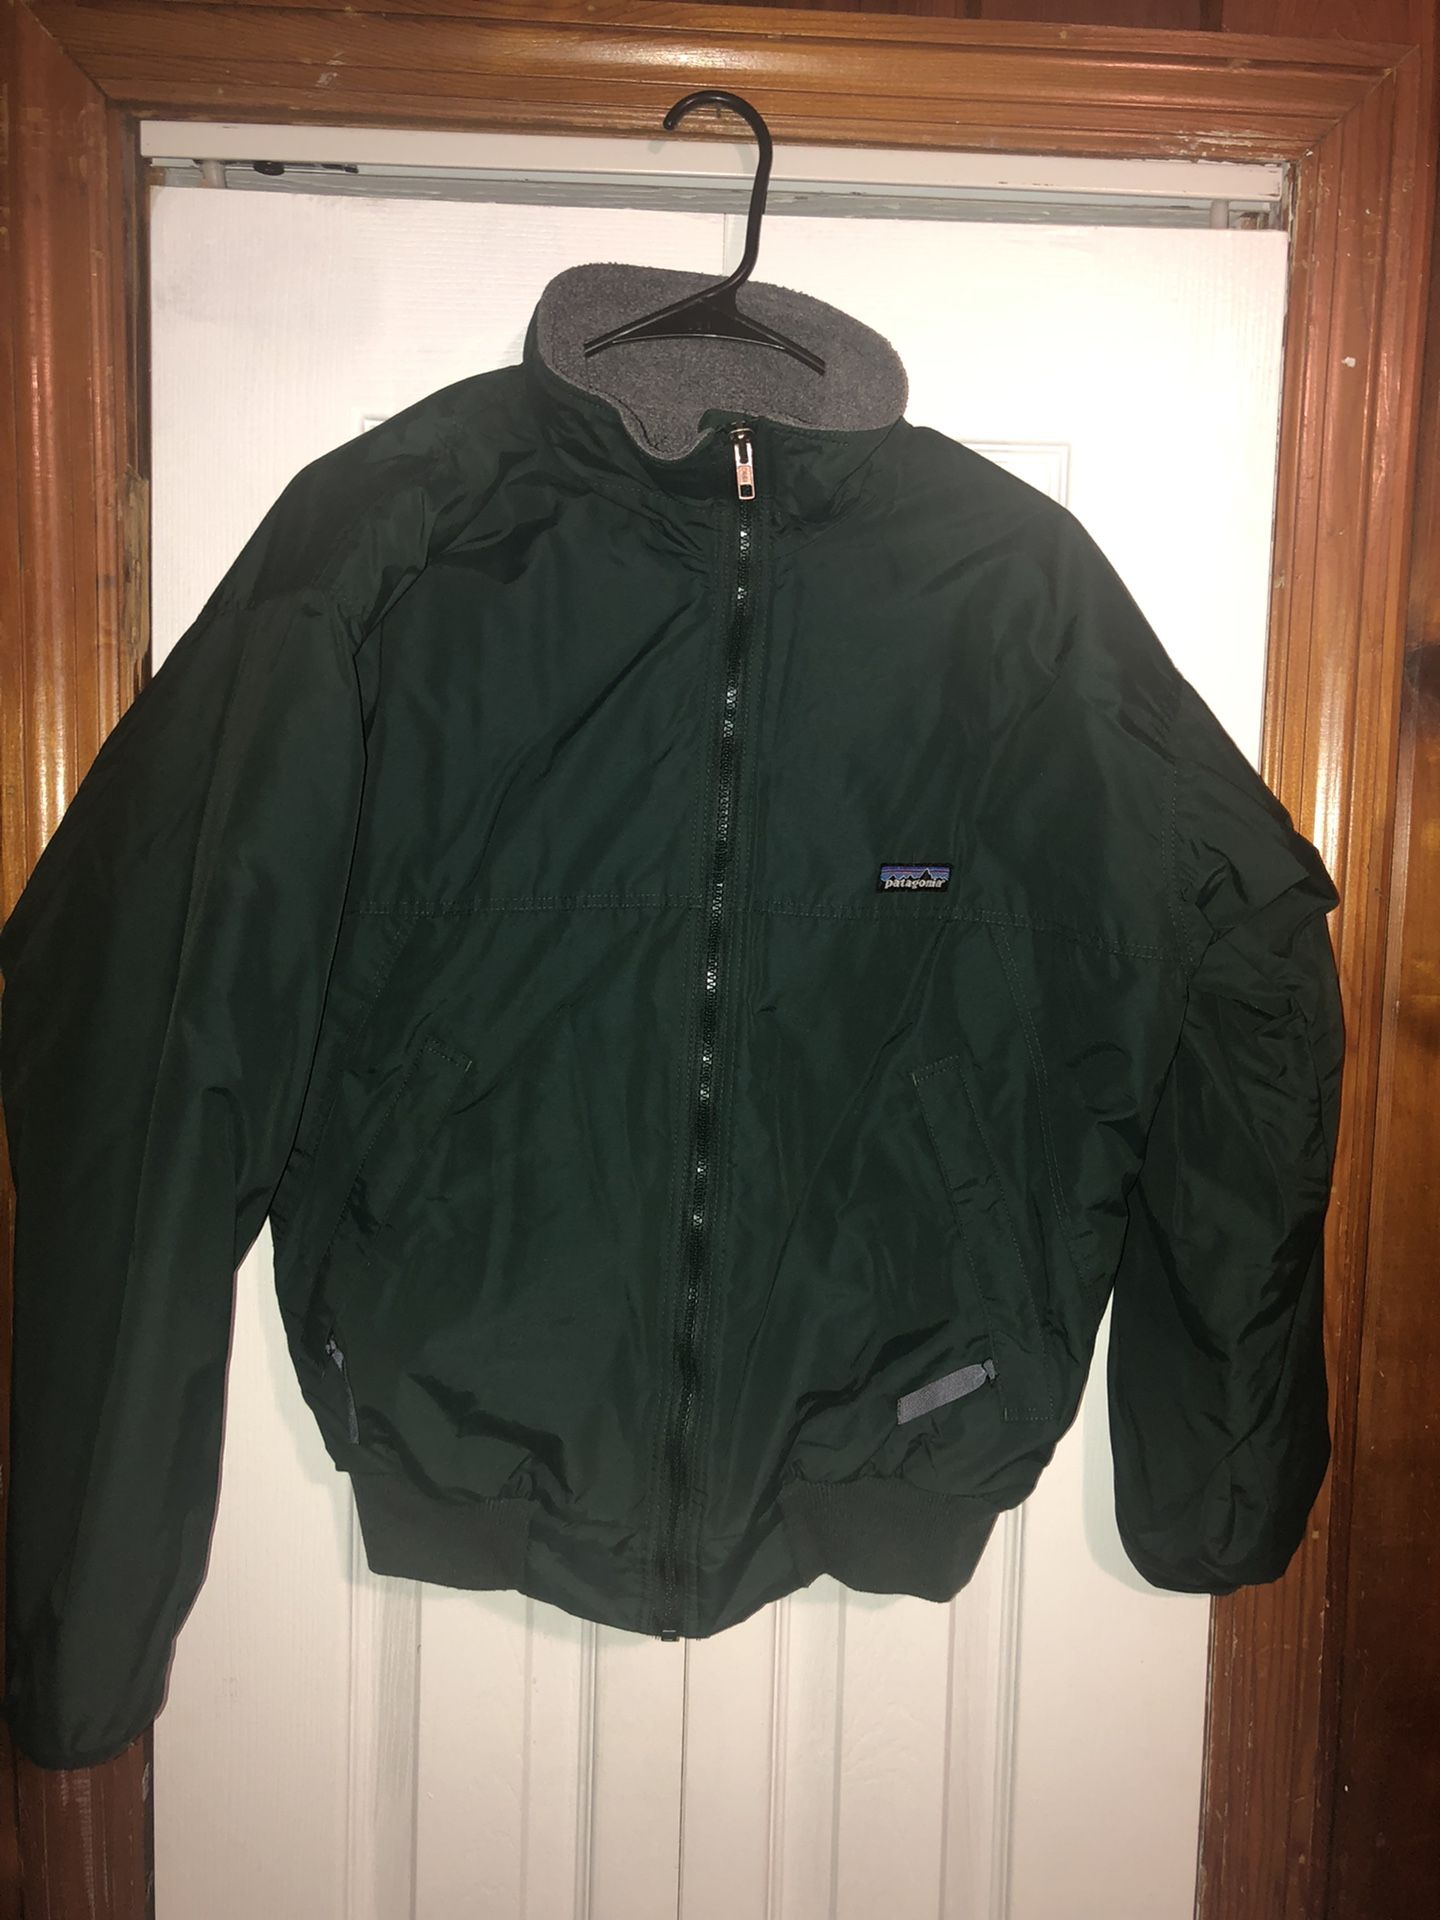 Patagonia Coat Green - Size Small - No Tears- Fast Shipping